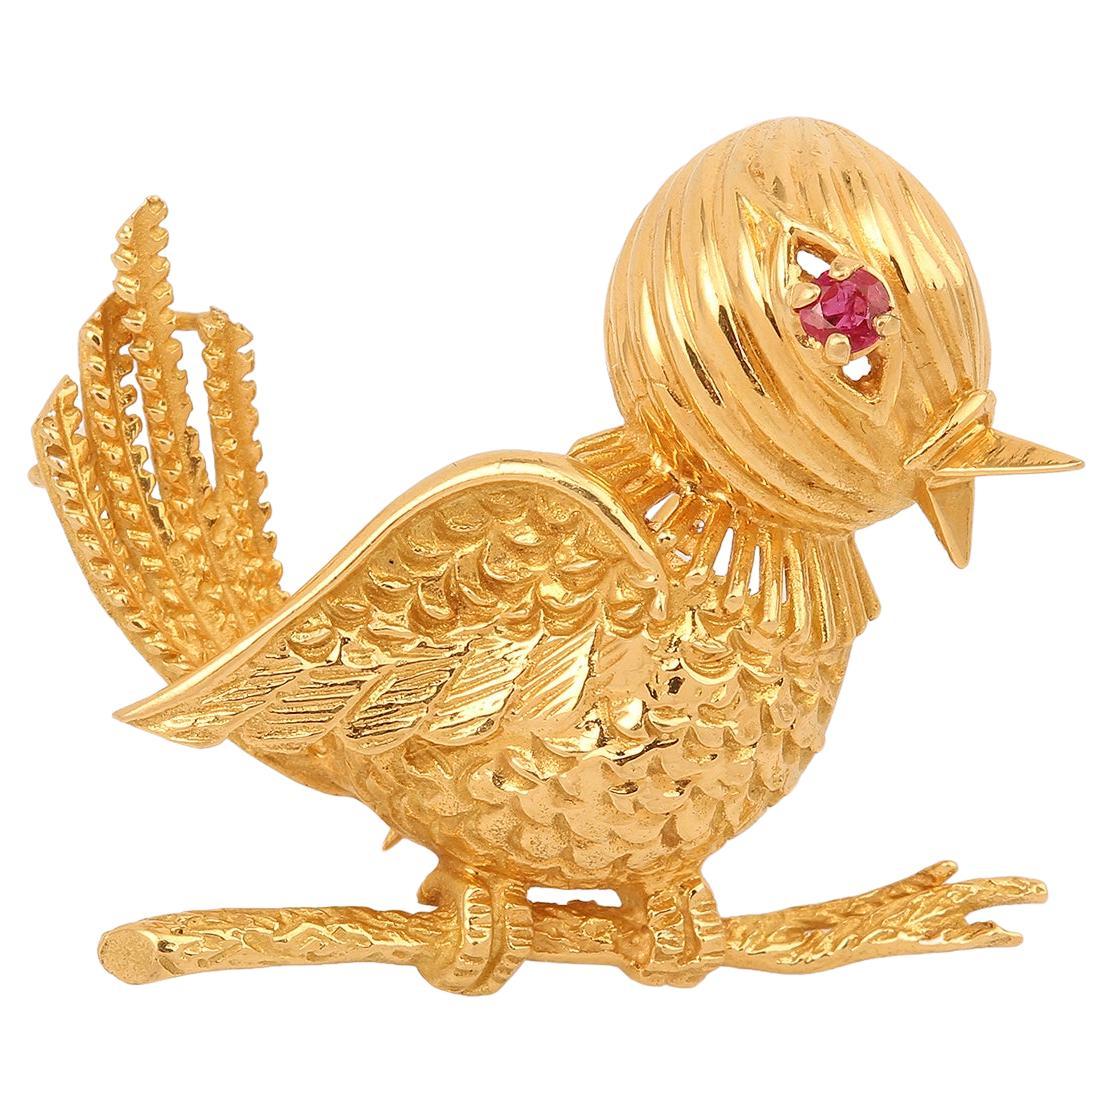 Mellerio Dits Meller Ruby 18 Carat Yellow Gold Chick Brooch For Sale